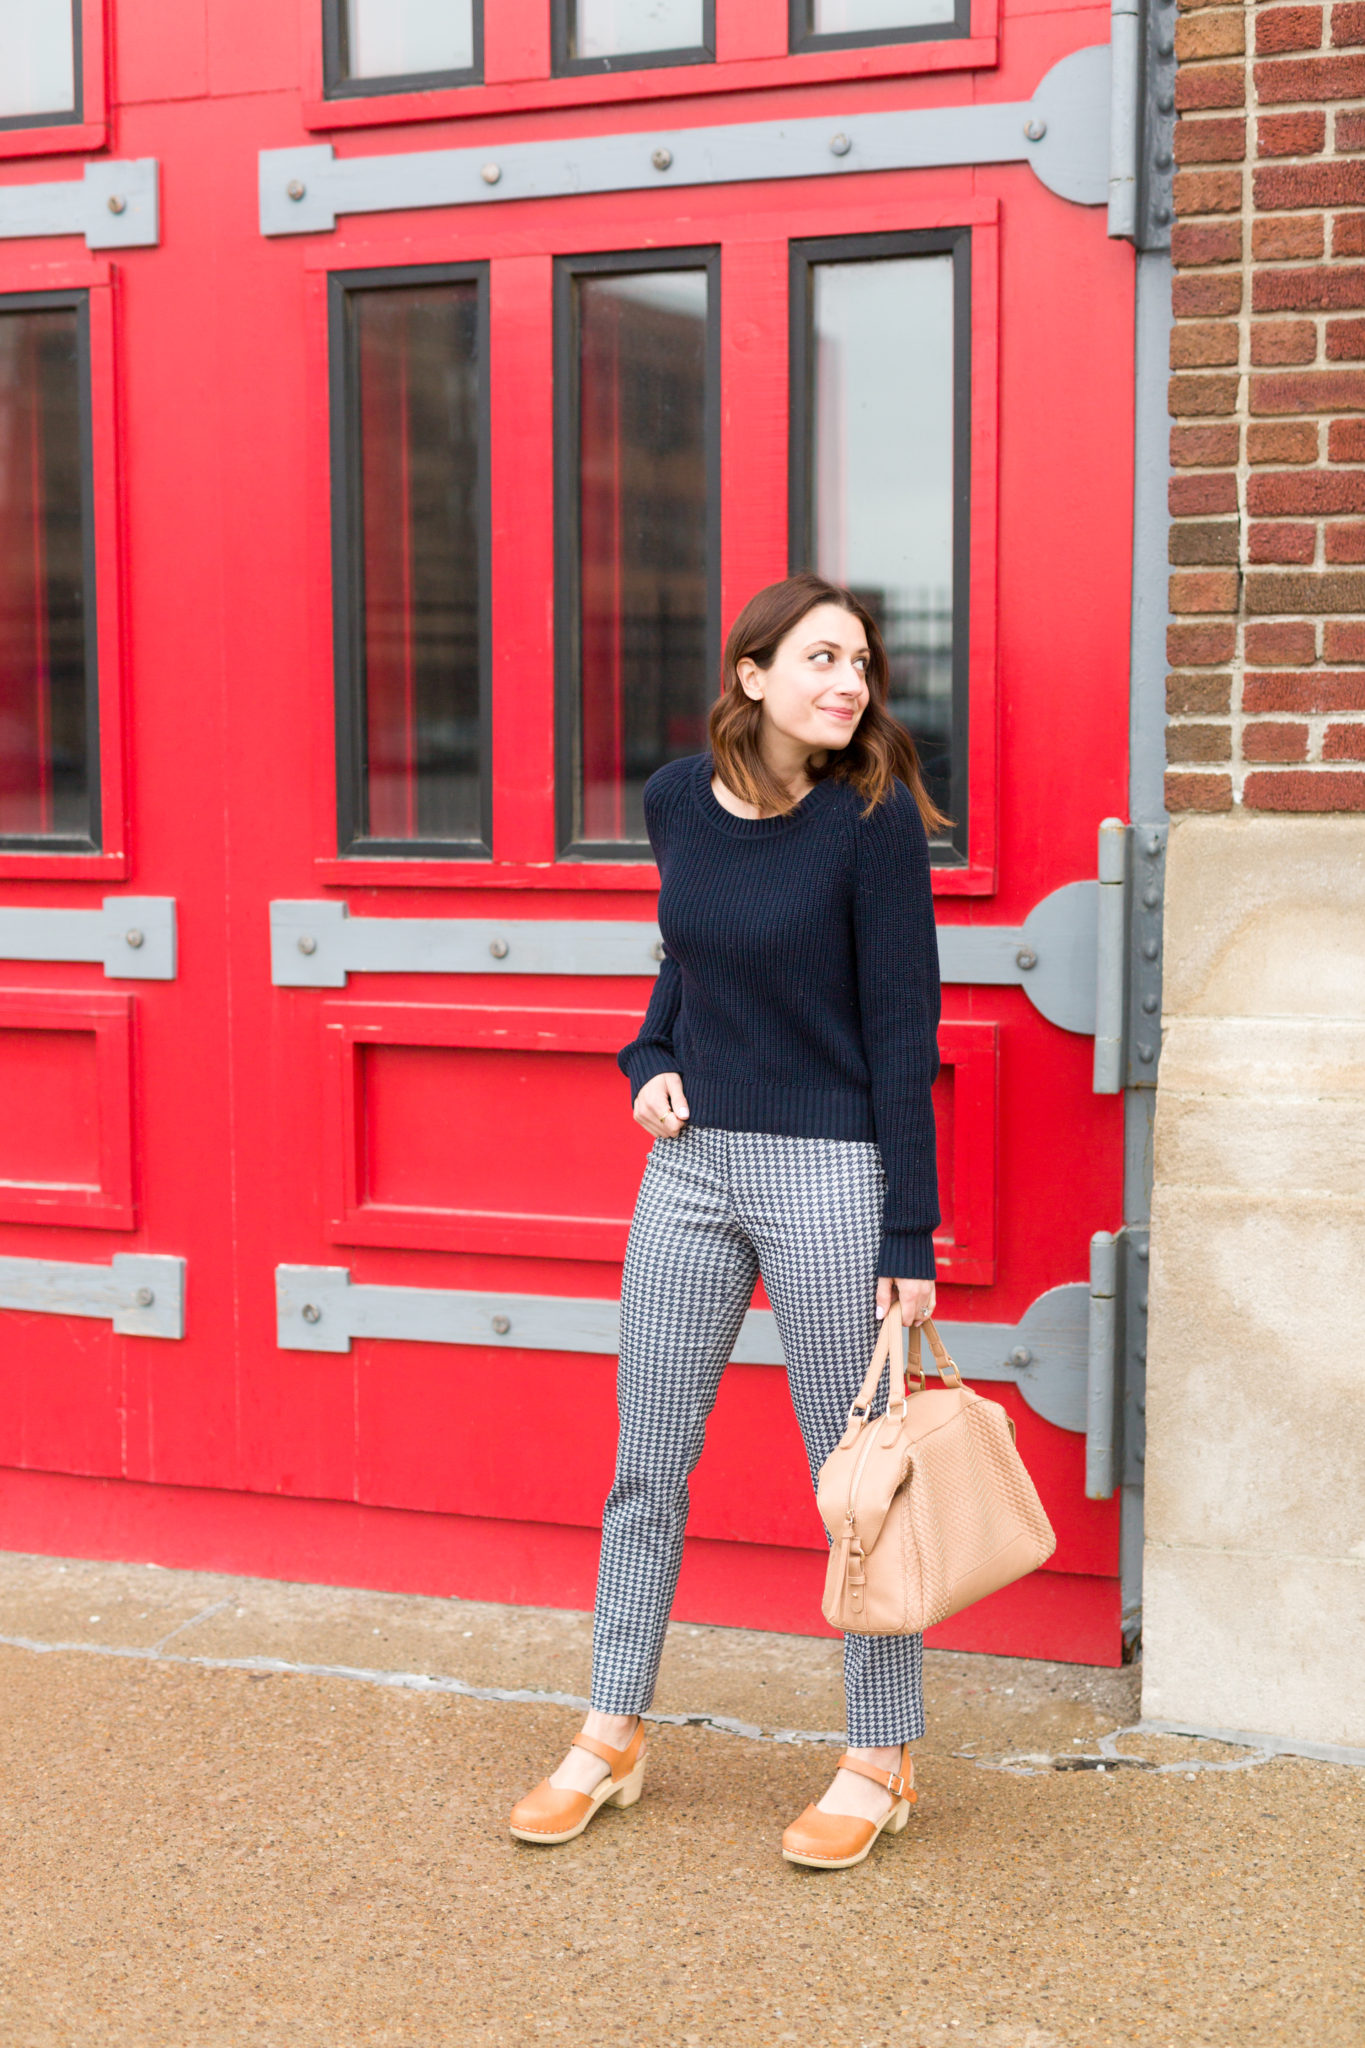 Margaret M Slimming pants | styling clogs for work | how to wear clogs to the office | the perfect pants for the office | work wear style on allweareblog.com